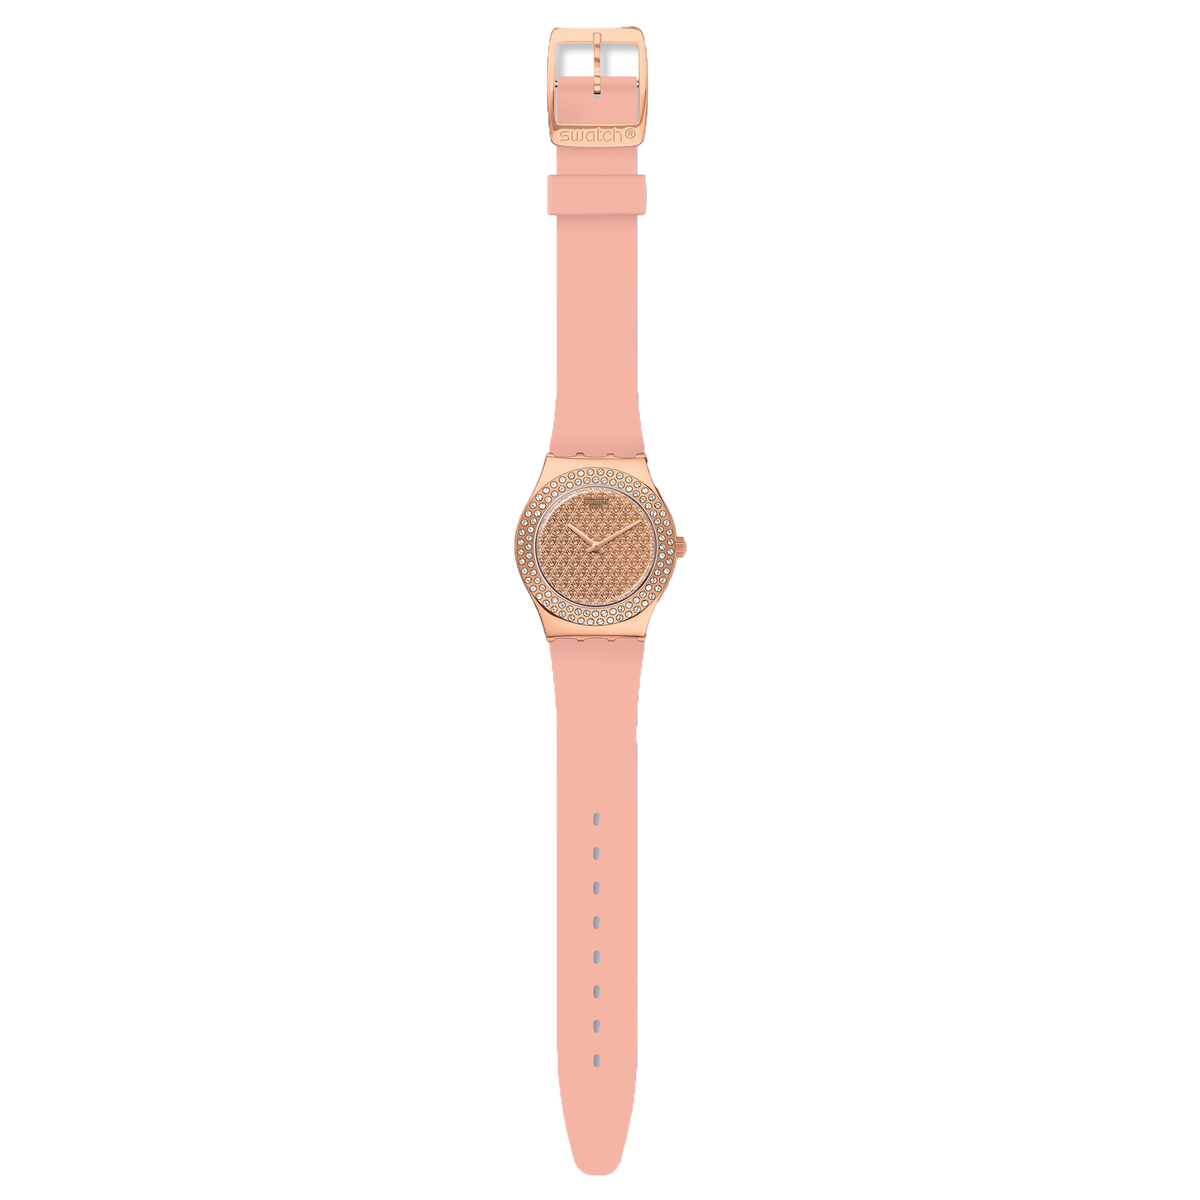 Swatch Irony Watch - Pink Confusion